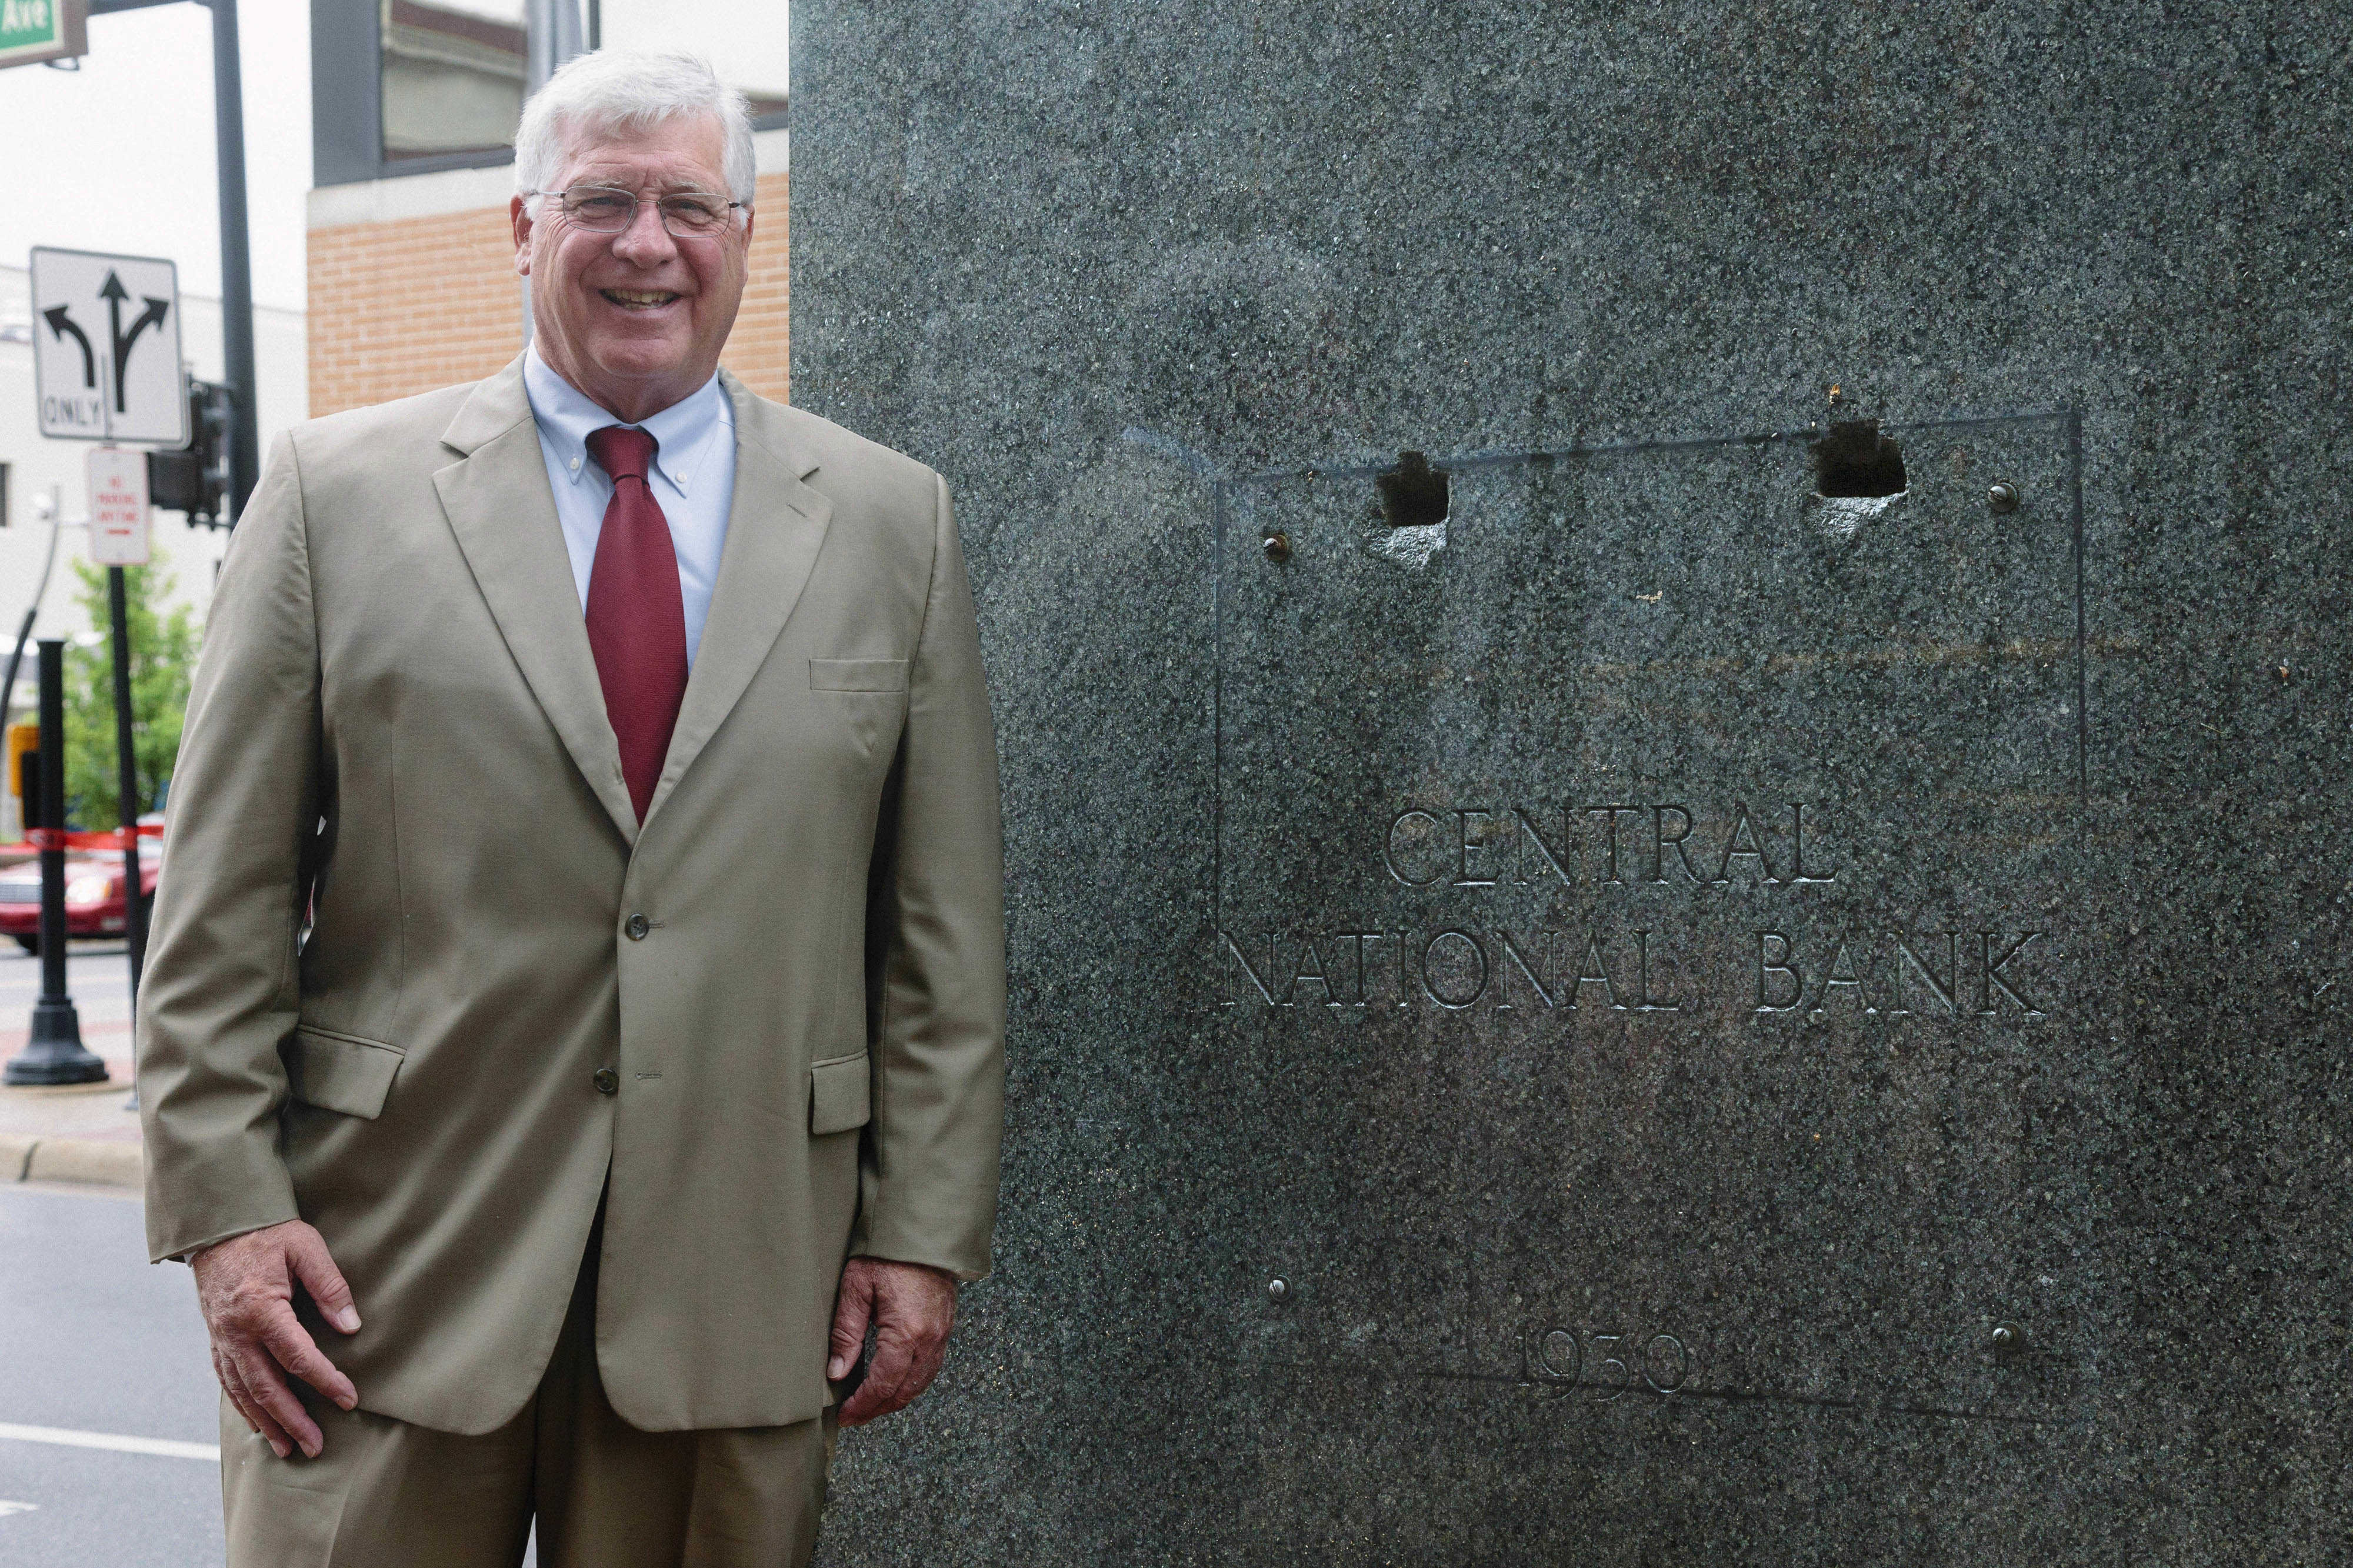 Roger Hinman in front of a Central National Bank granite slab on the exterior of the building